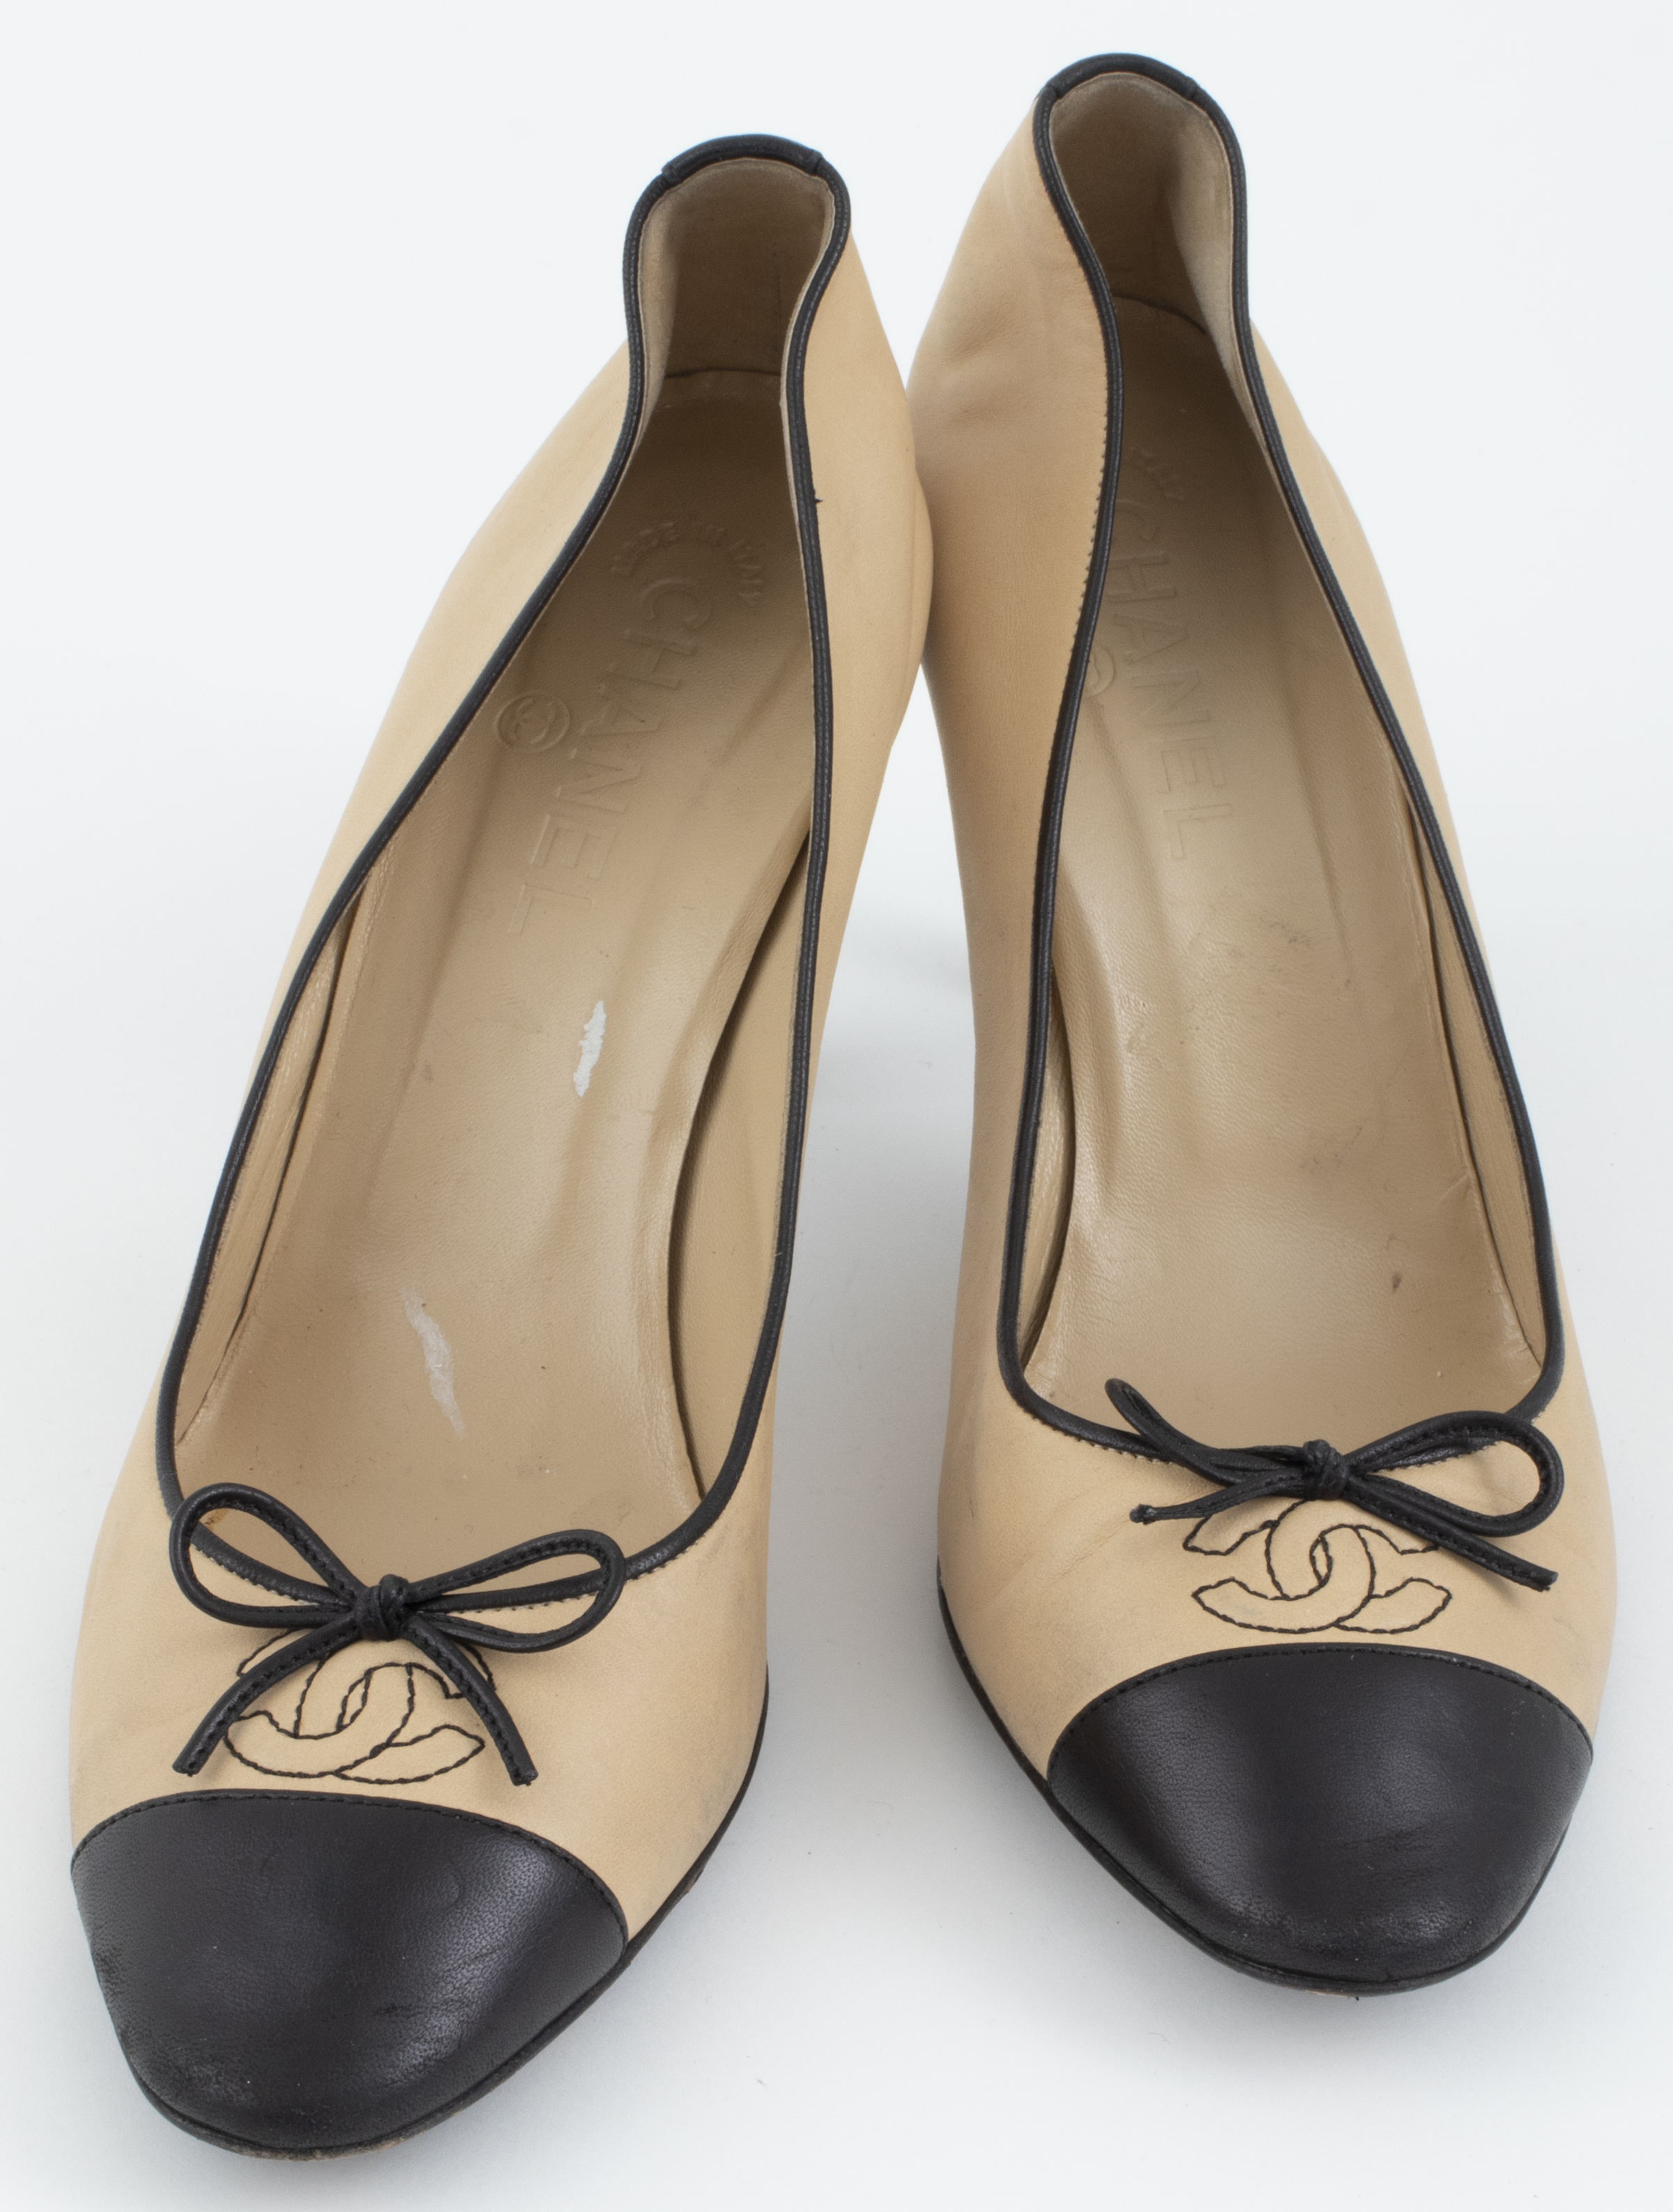 CHANEL BLACK AND TAN LEATHER SHOES  3c444d